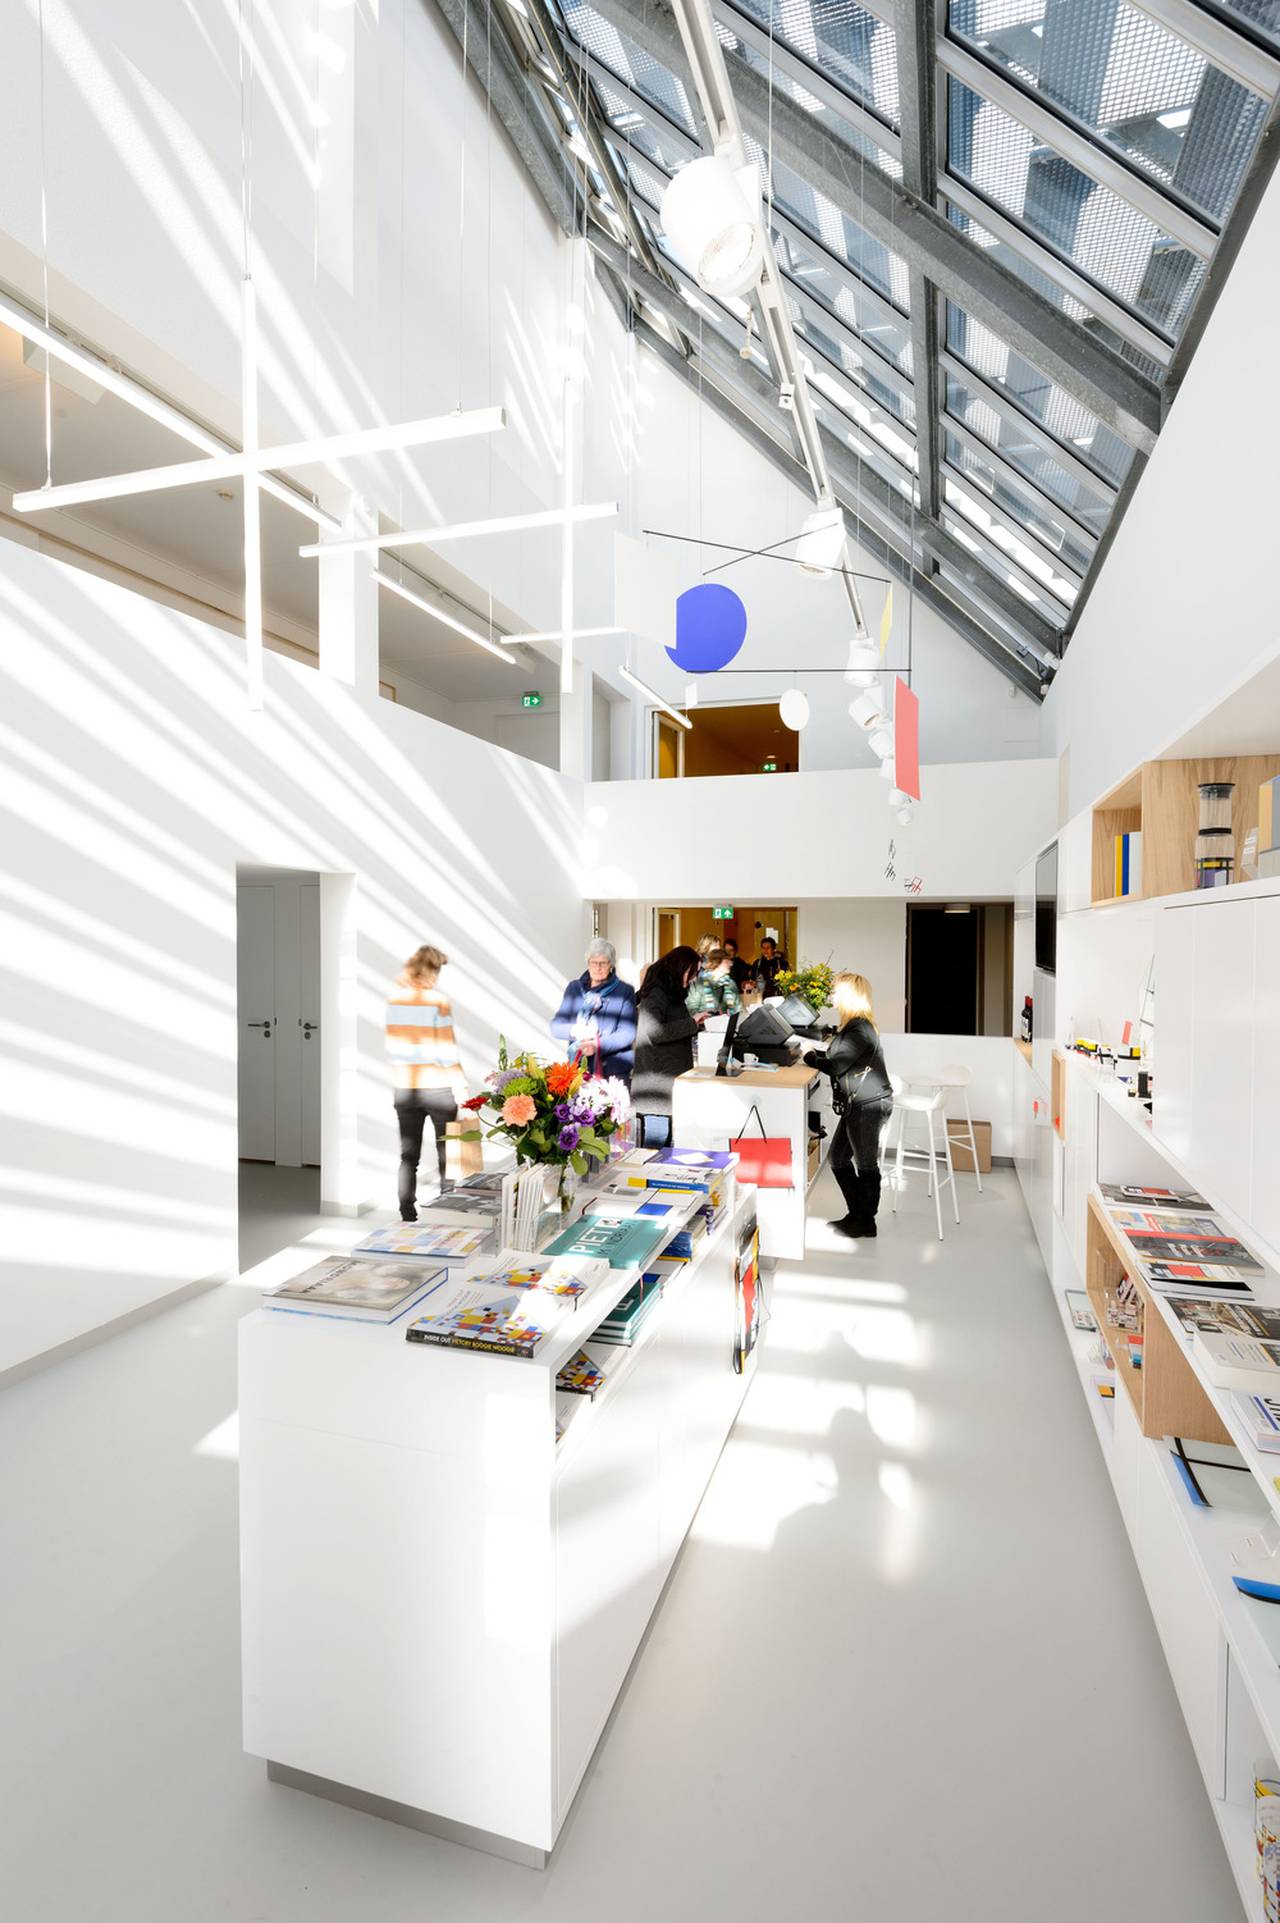 The renovation of the interior was based on the concept of an empty canvas. When entering the Mondrian House, you experience a white, bright space : Photo credit © Mike Bink Photography